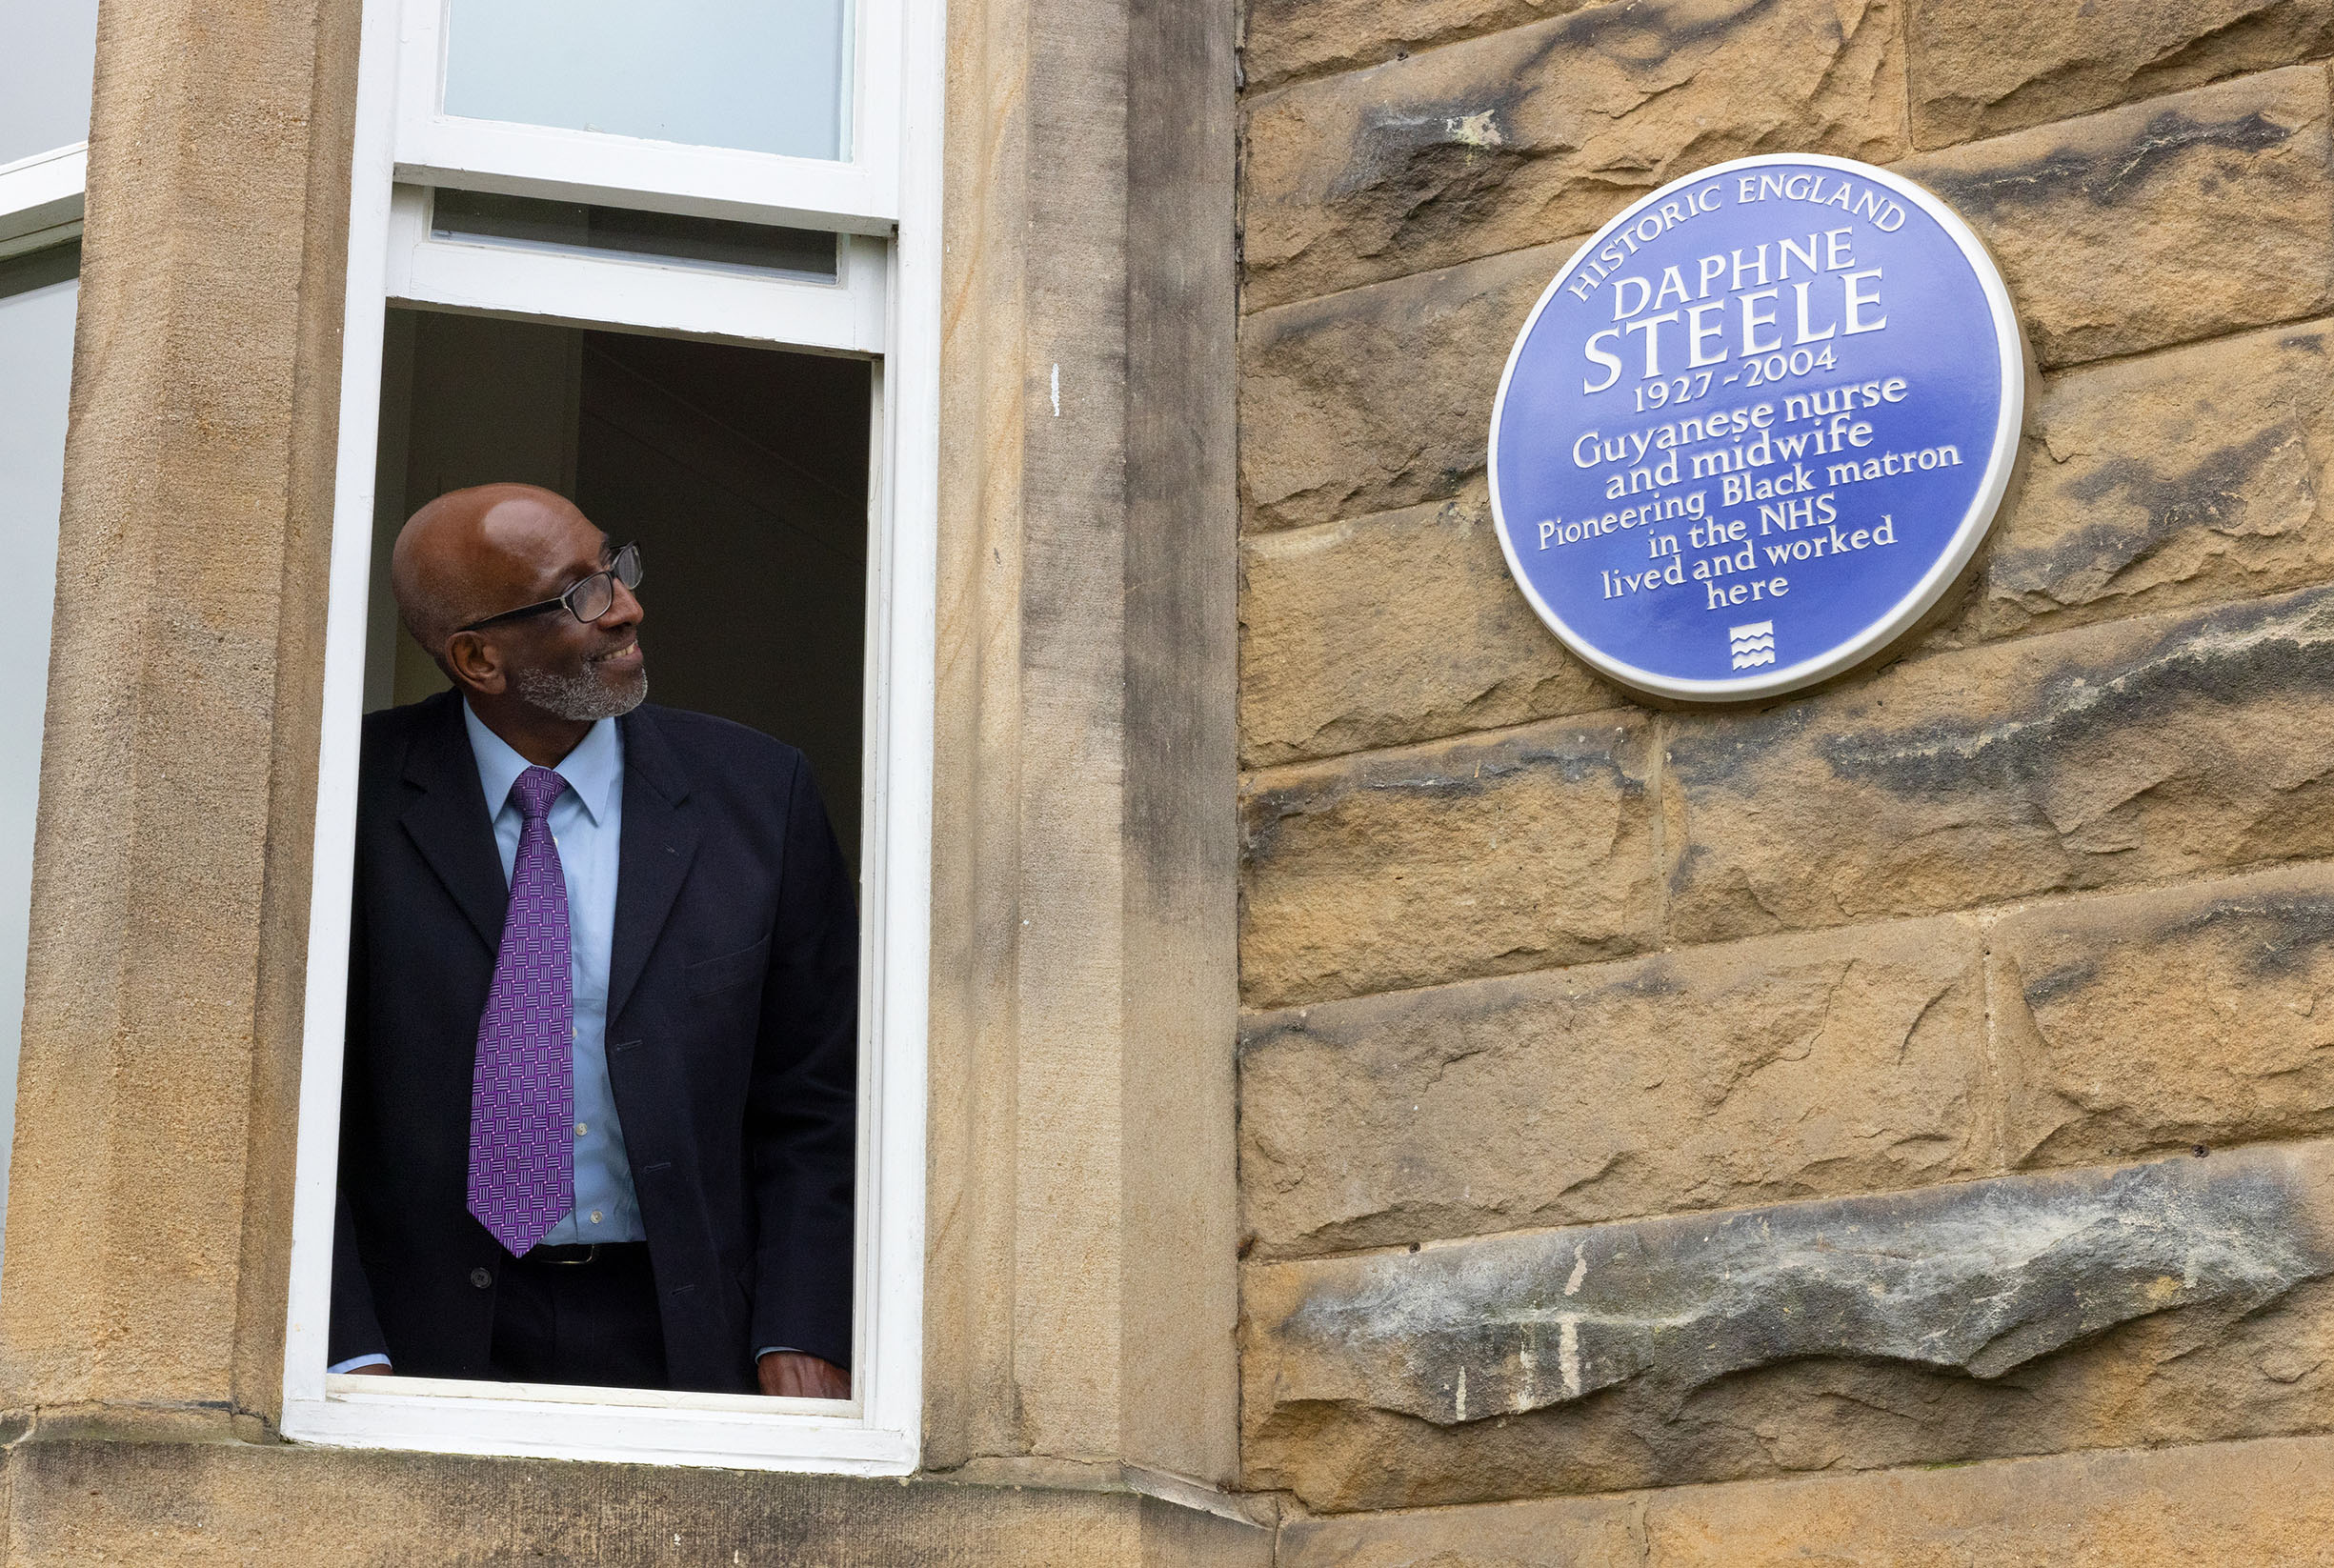 A man in a suit and tie stood at an open window, turned to look at a heritage blue plaque on a wall next to him